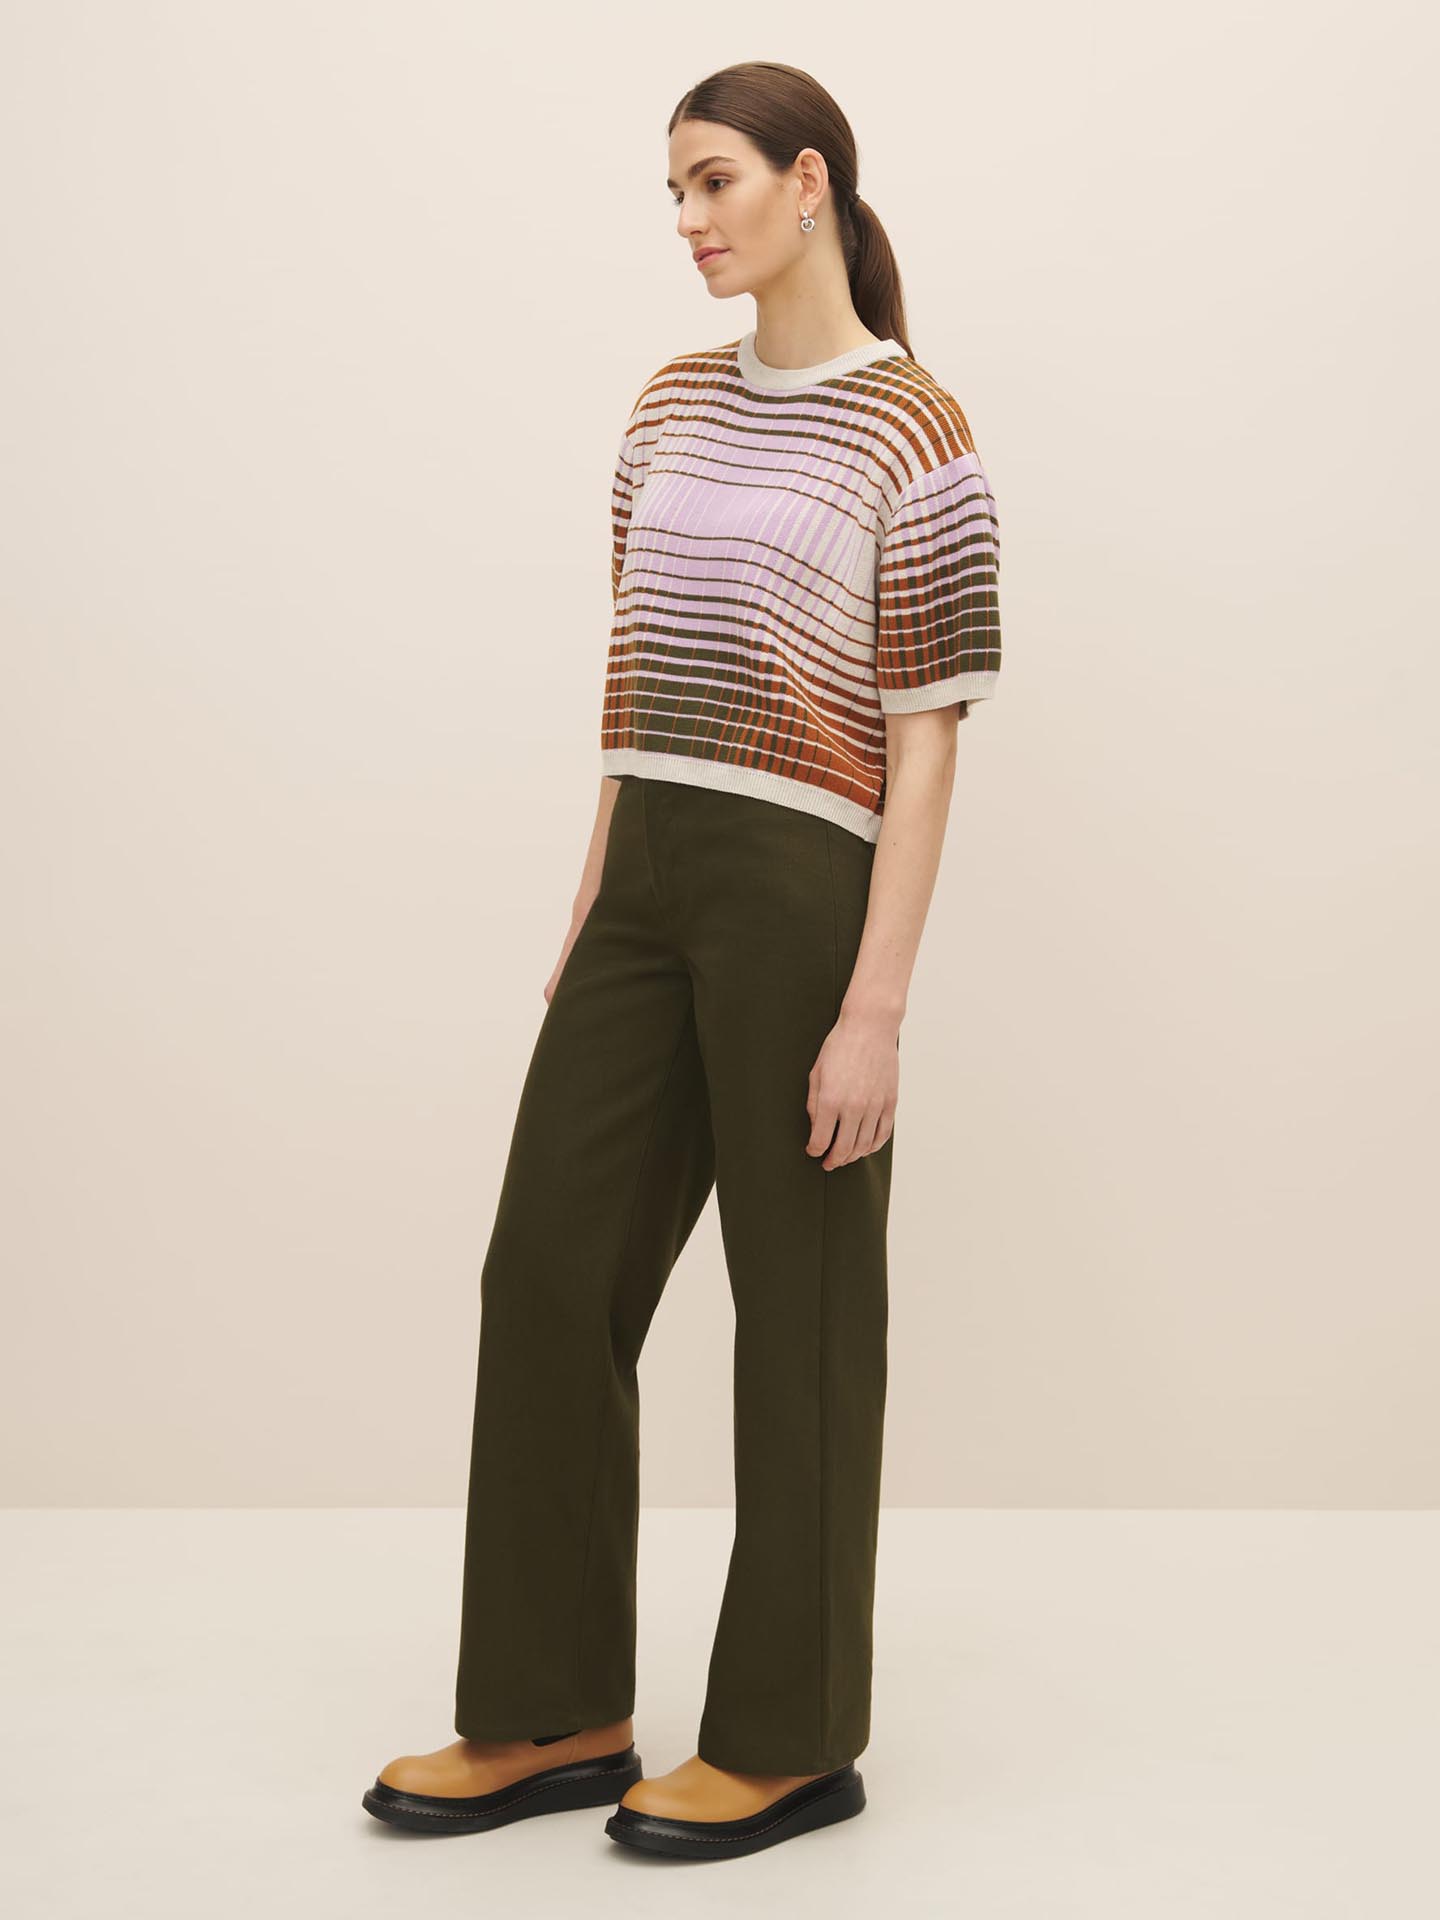 A woman stands in a neutral backdrop, wearing a striped, multicolored oversized Kowtow Gradient Knit Top with drop shoulder sleeves and dark green trousers, paired with black loafers.